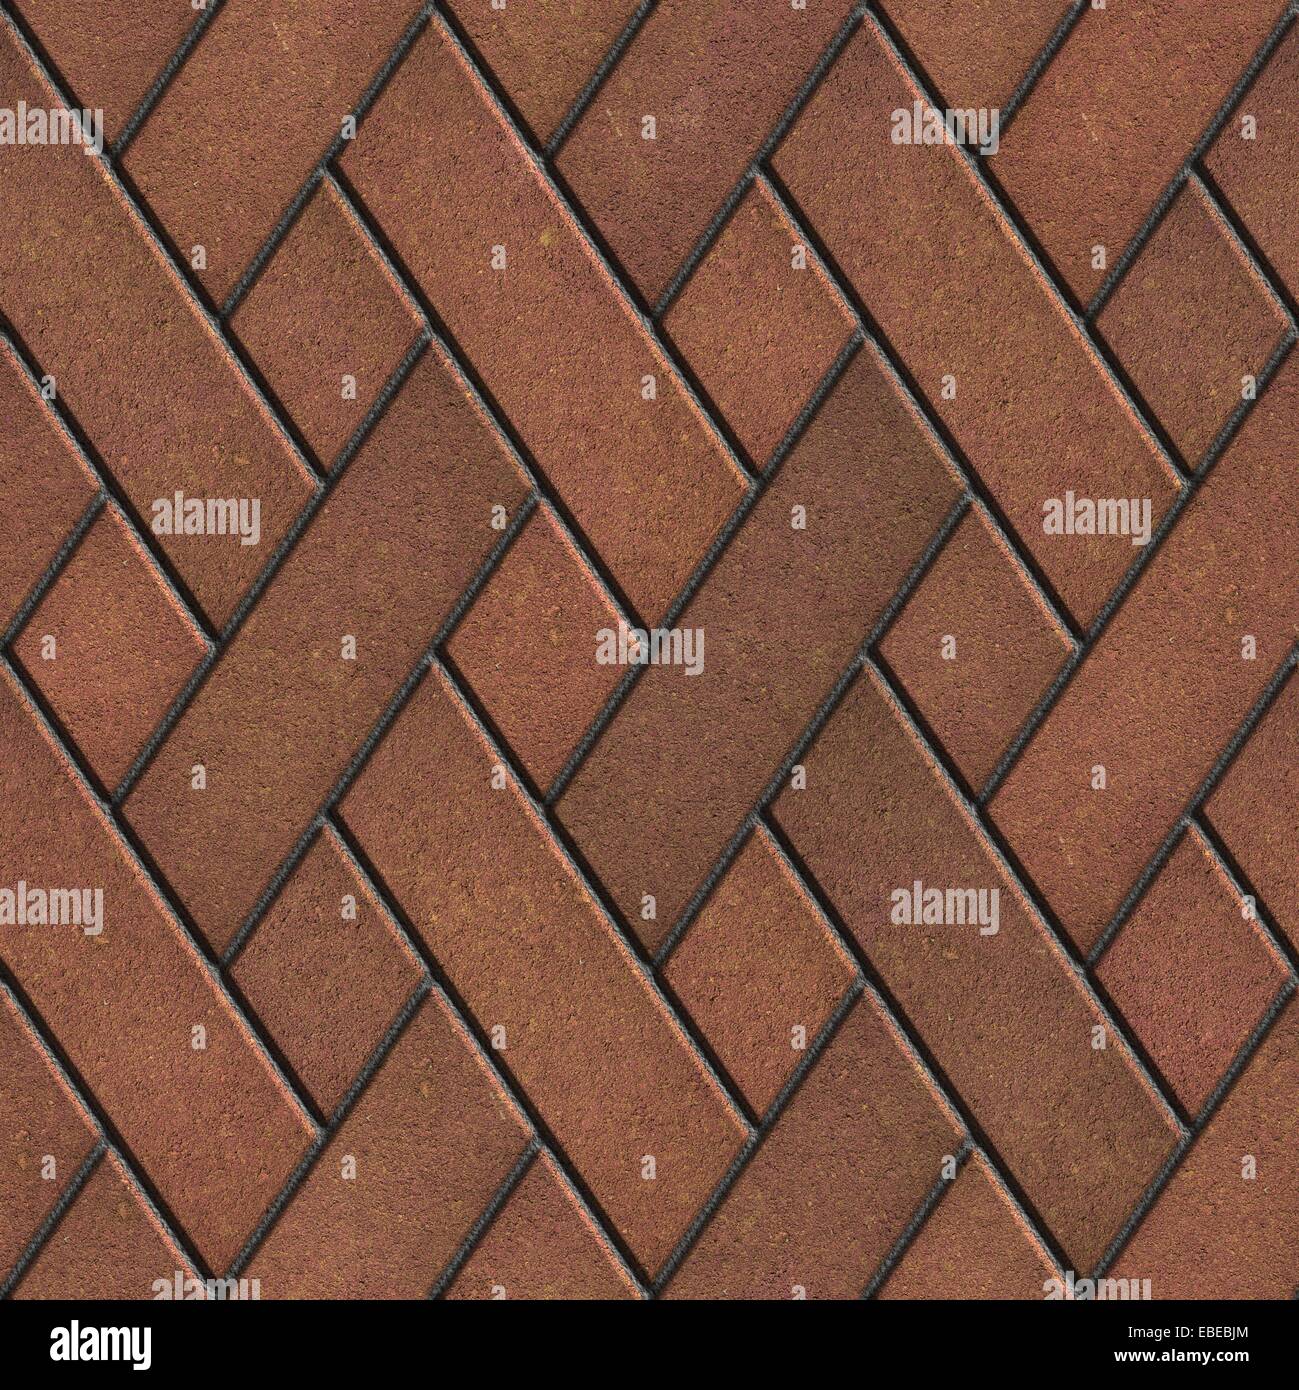 Brown Pavement Consisting of Combined Rhomb and Parallelograms, Seamless Tileable Texture. Stock Photo